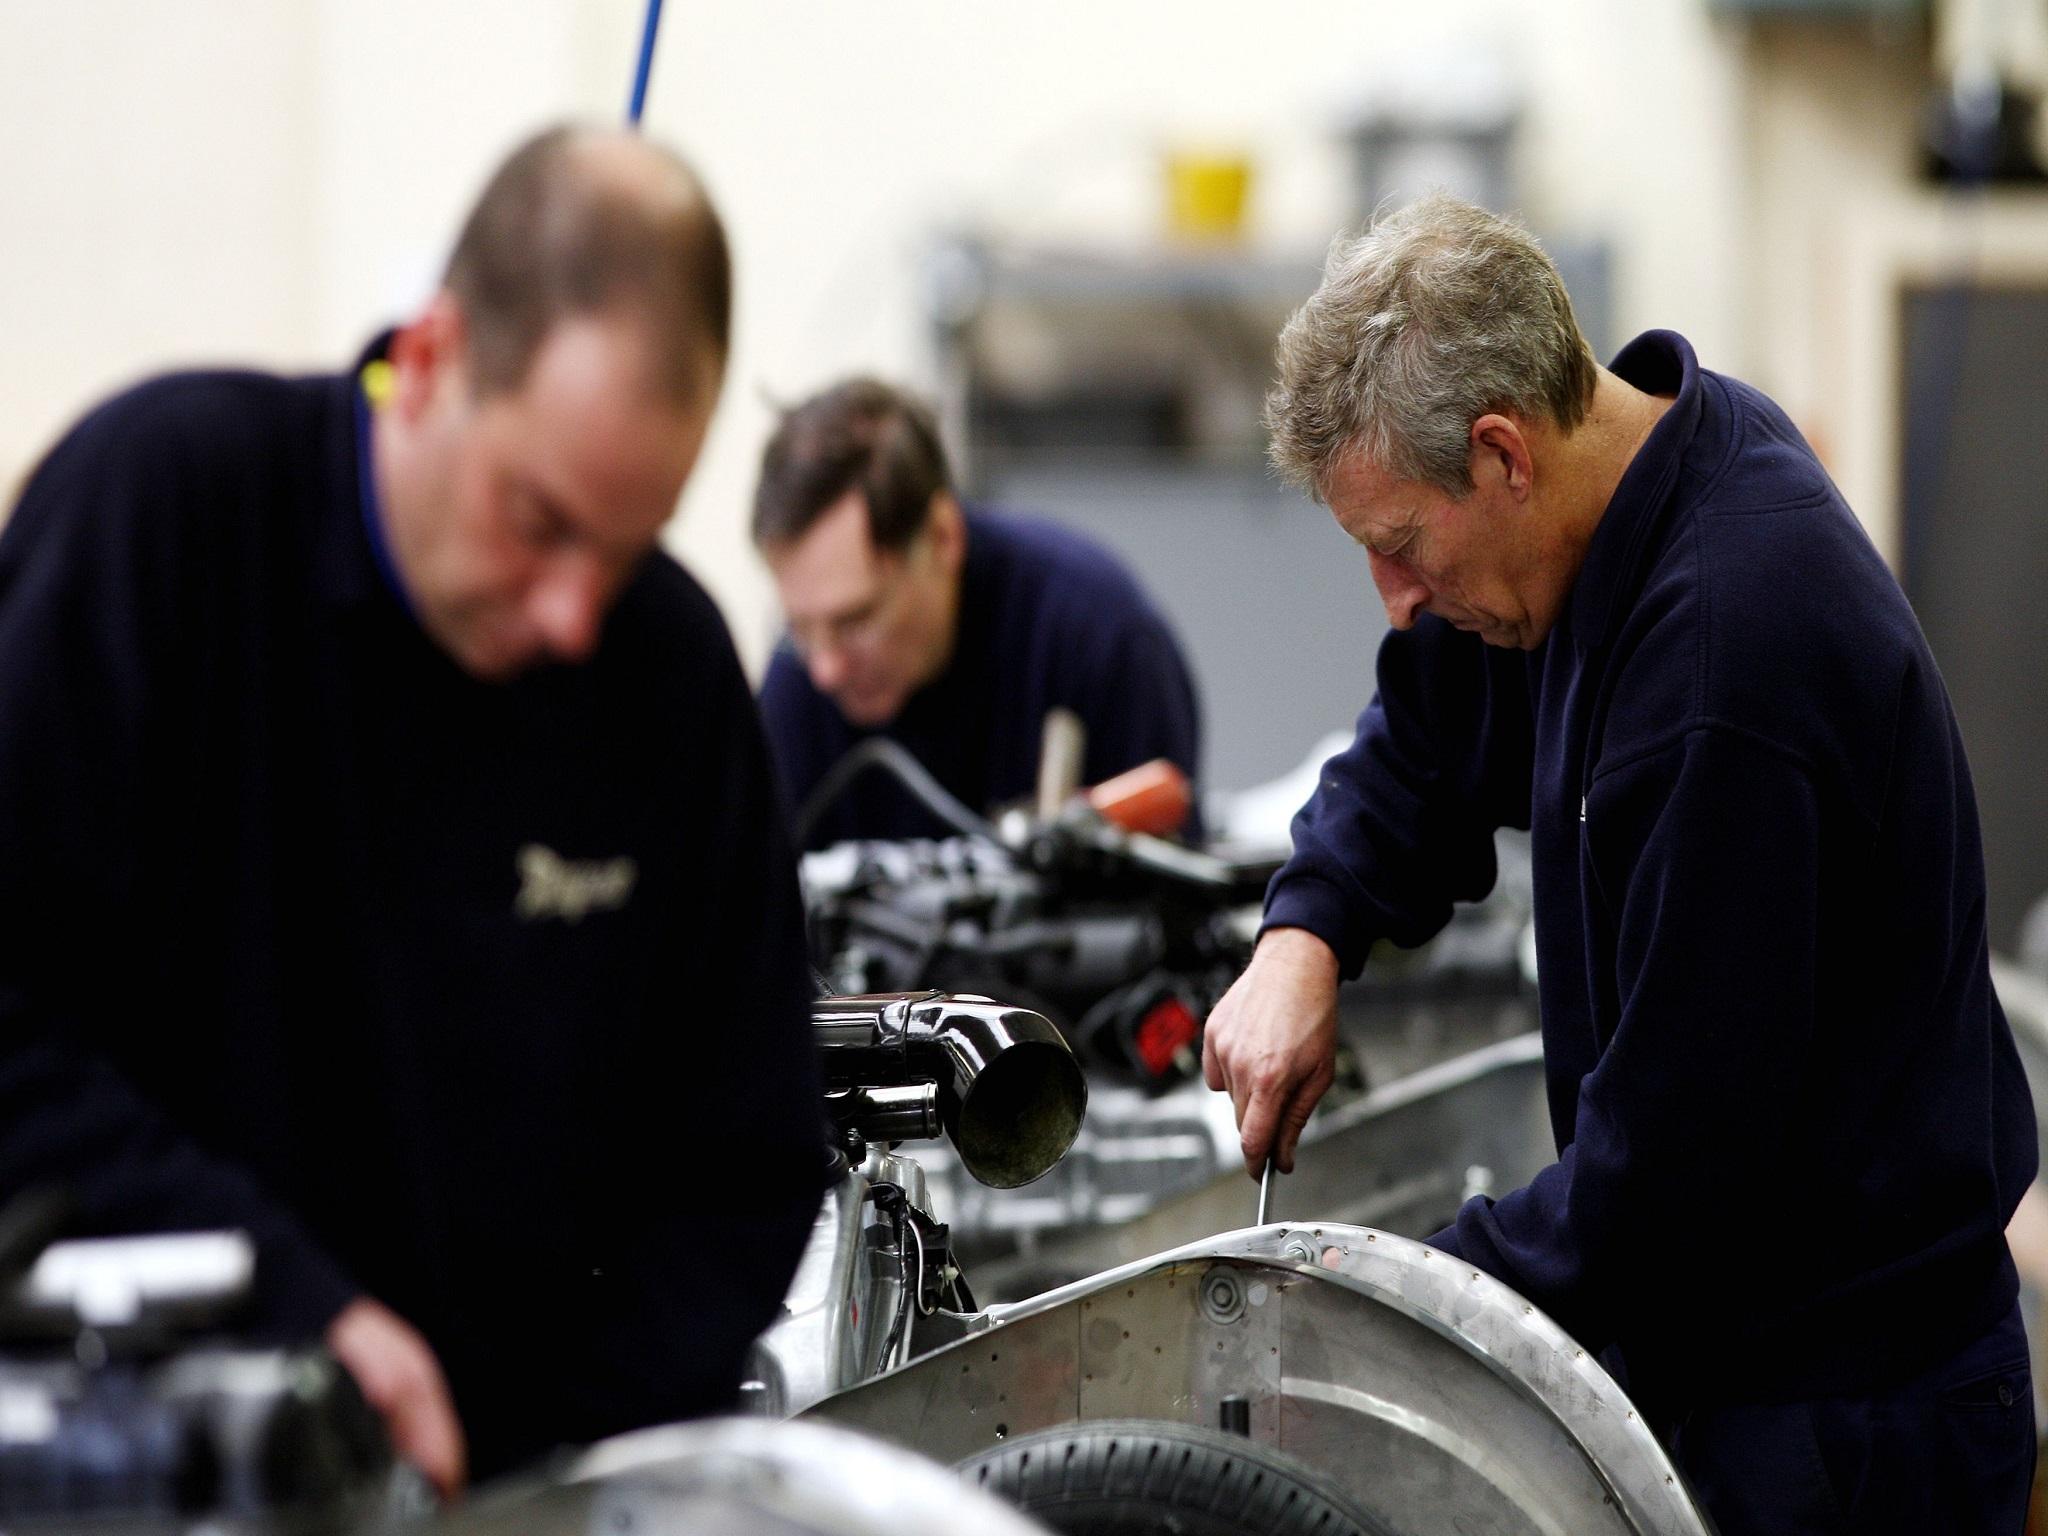 Manufacturing accounts for around 10 per cent of the UK's GDP